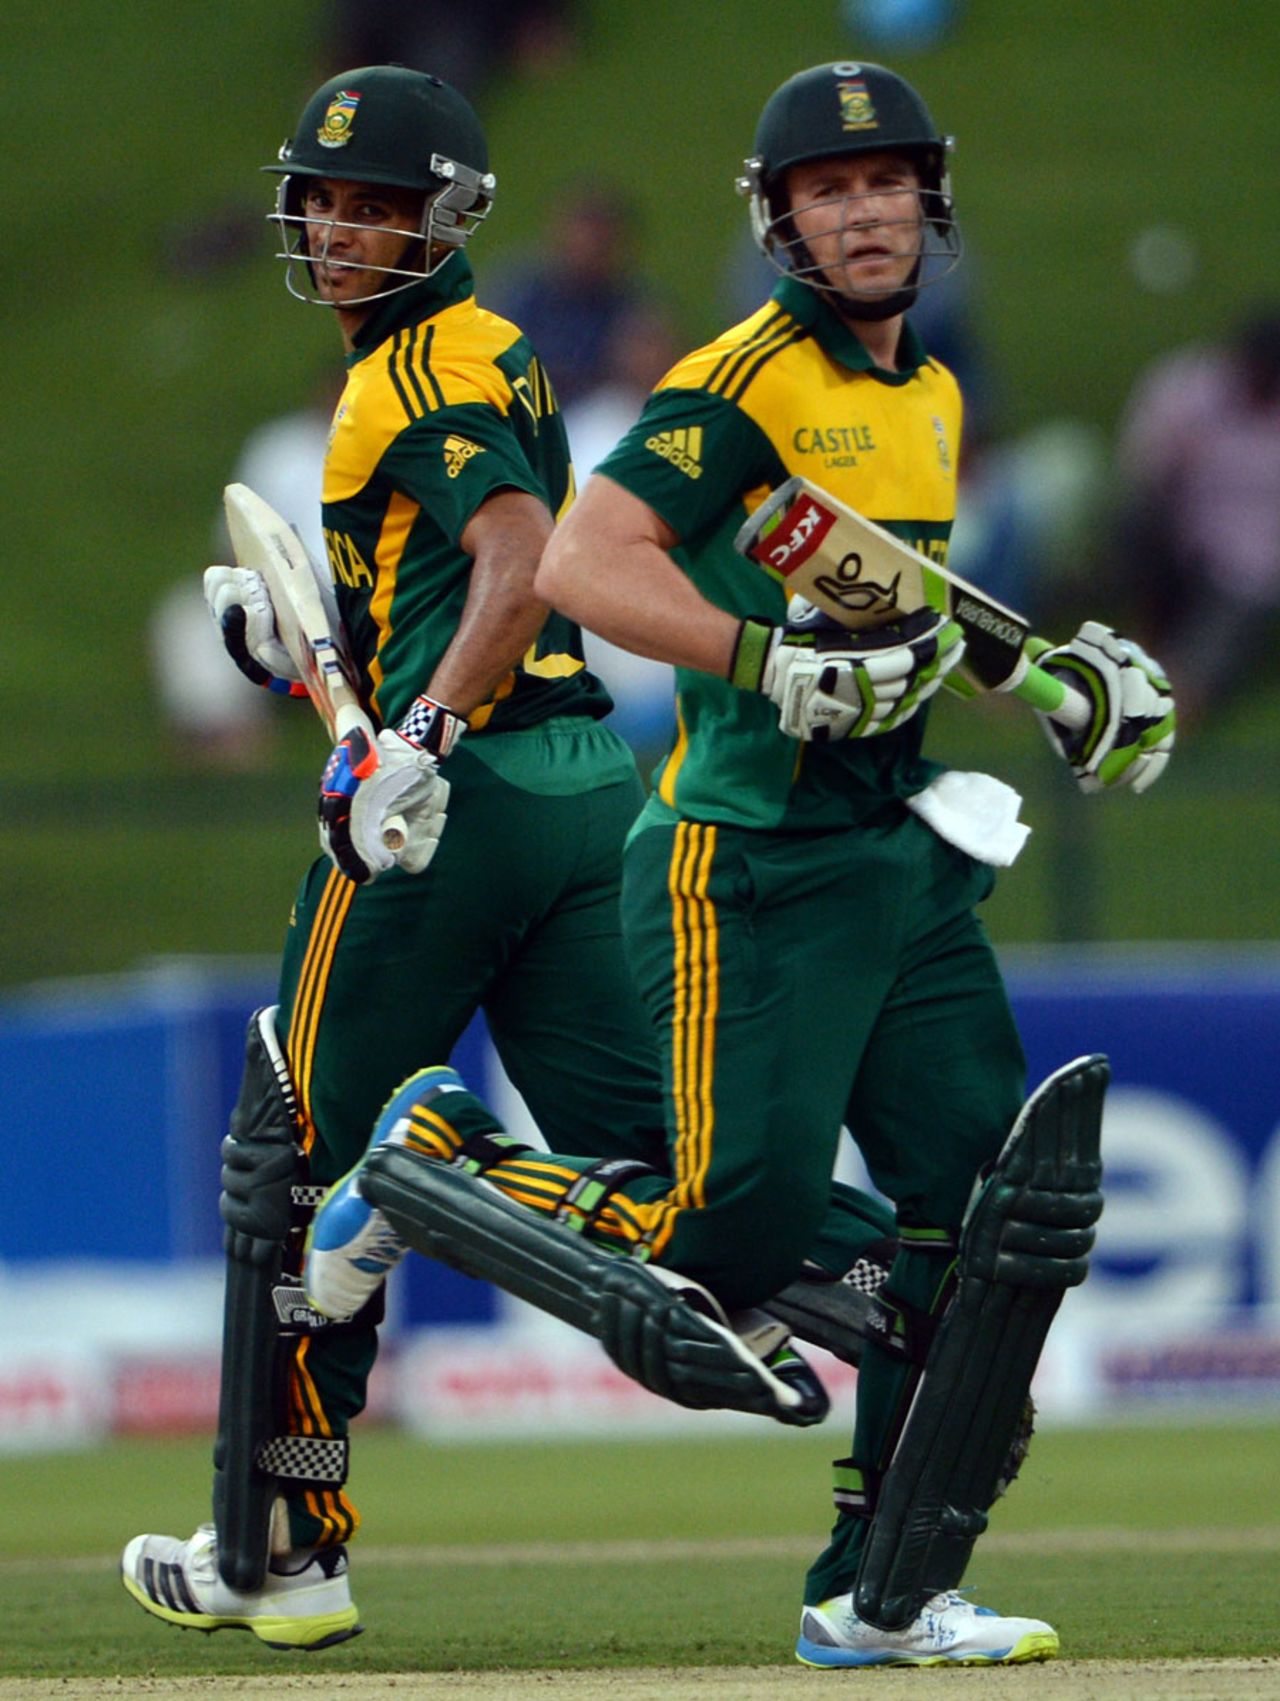 JP Duminy and AB de Villiers added 70 for the fourth wicket, Pakistan v South Africa, 3rd ODI, Abu Dhabi, November 6, 2013